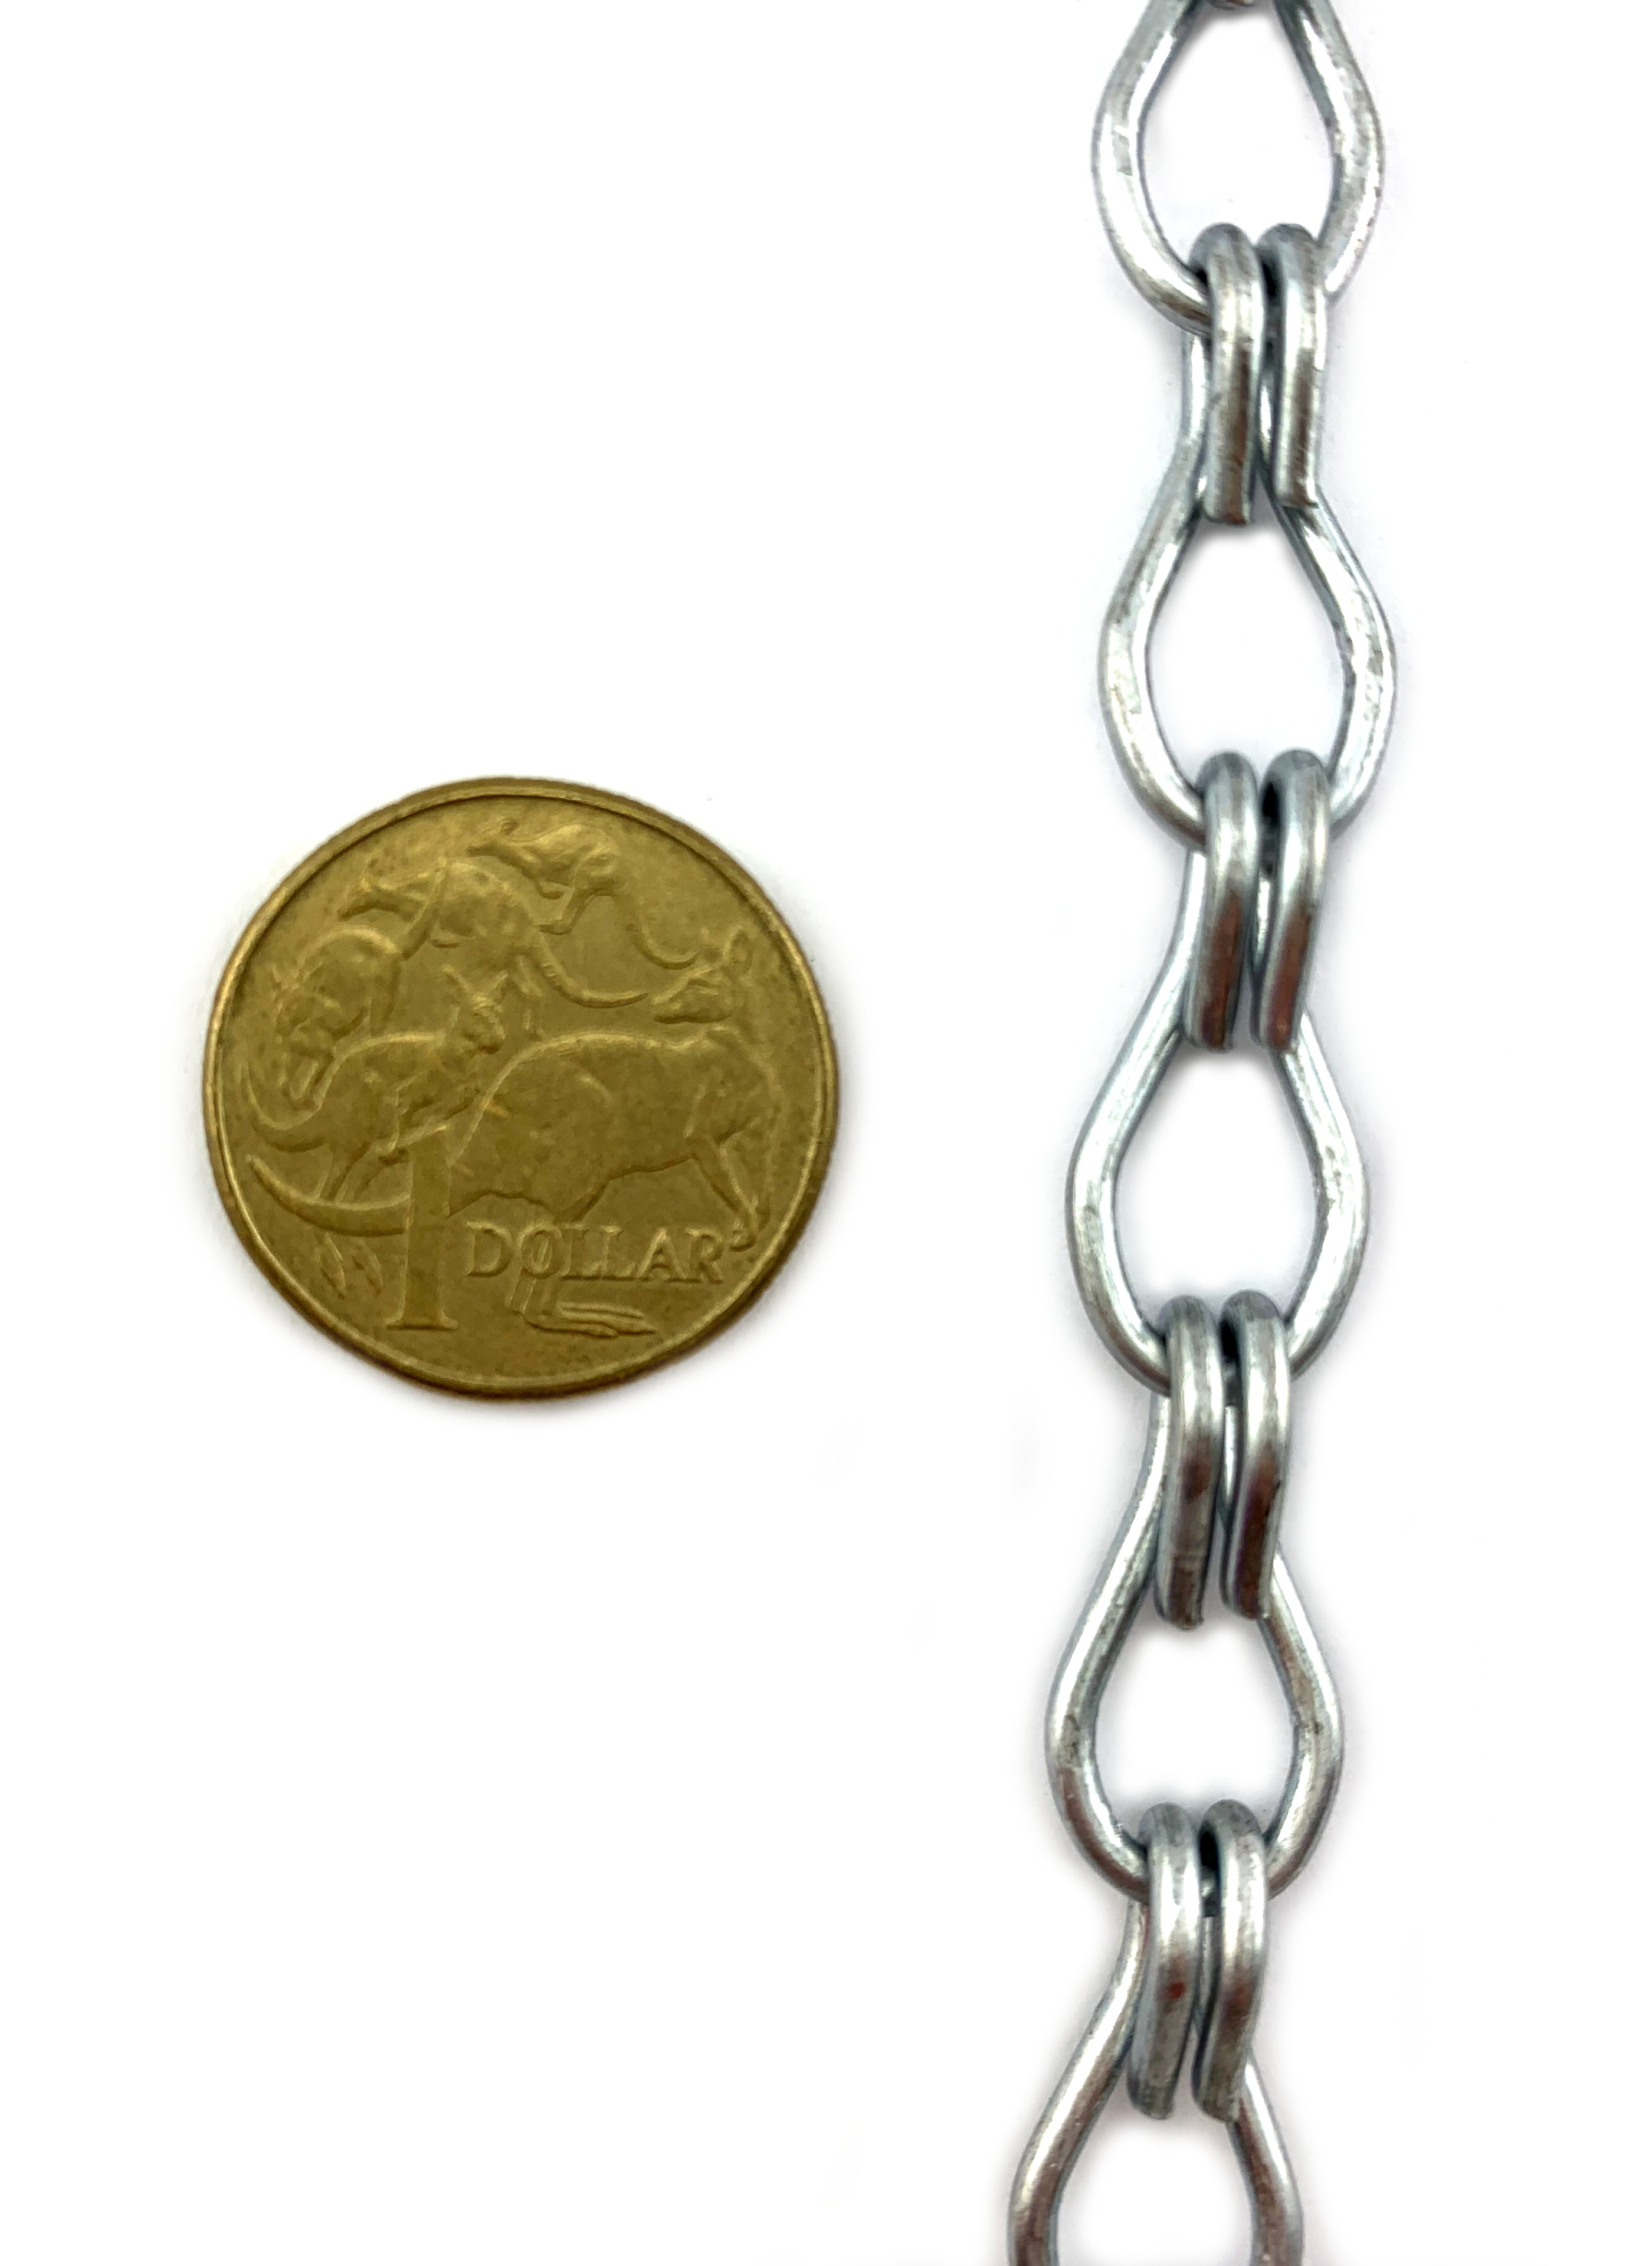 Double Jack Chain Galvanised size 2mm. Order by the metre. Australian made.